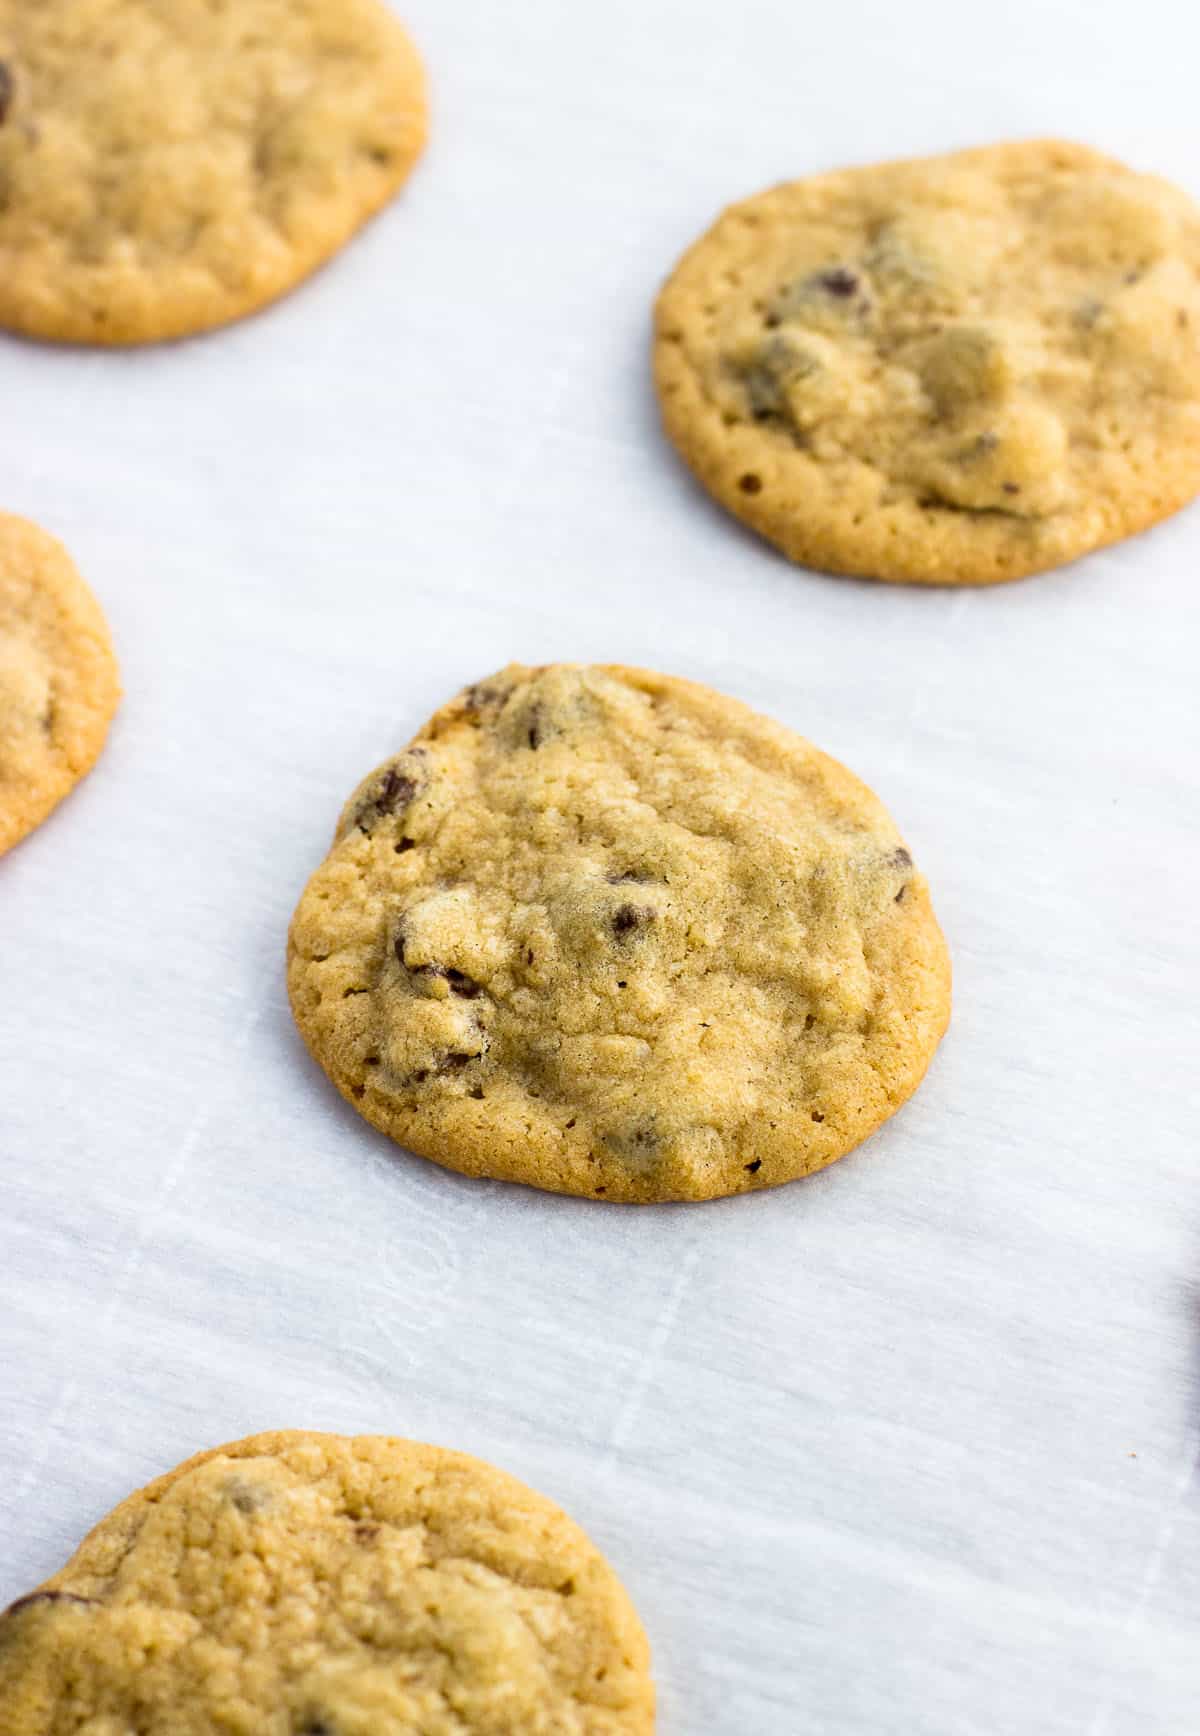 Baked chocolate chip cookies on a parchment-lined metal baking sheet.